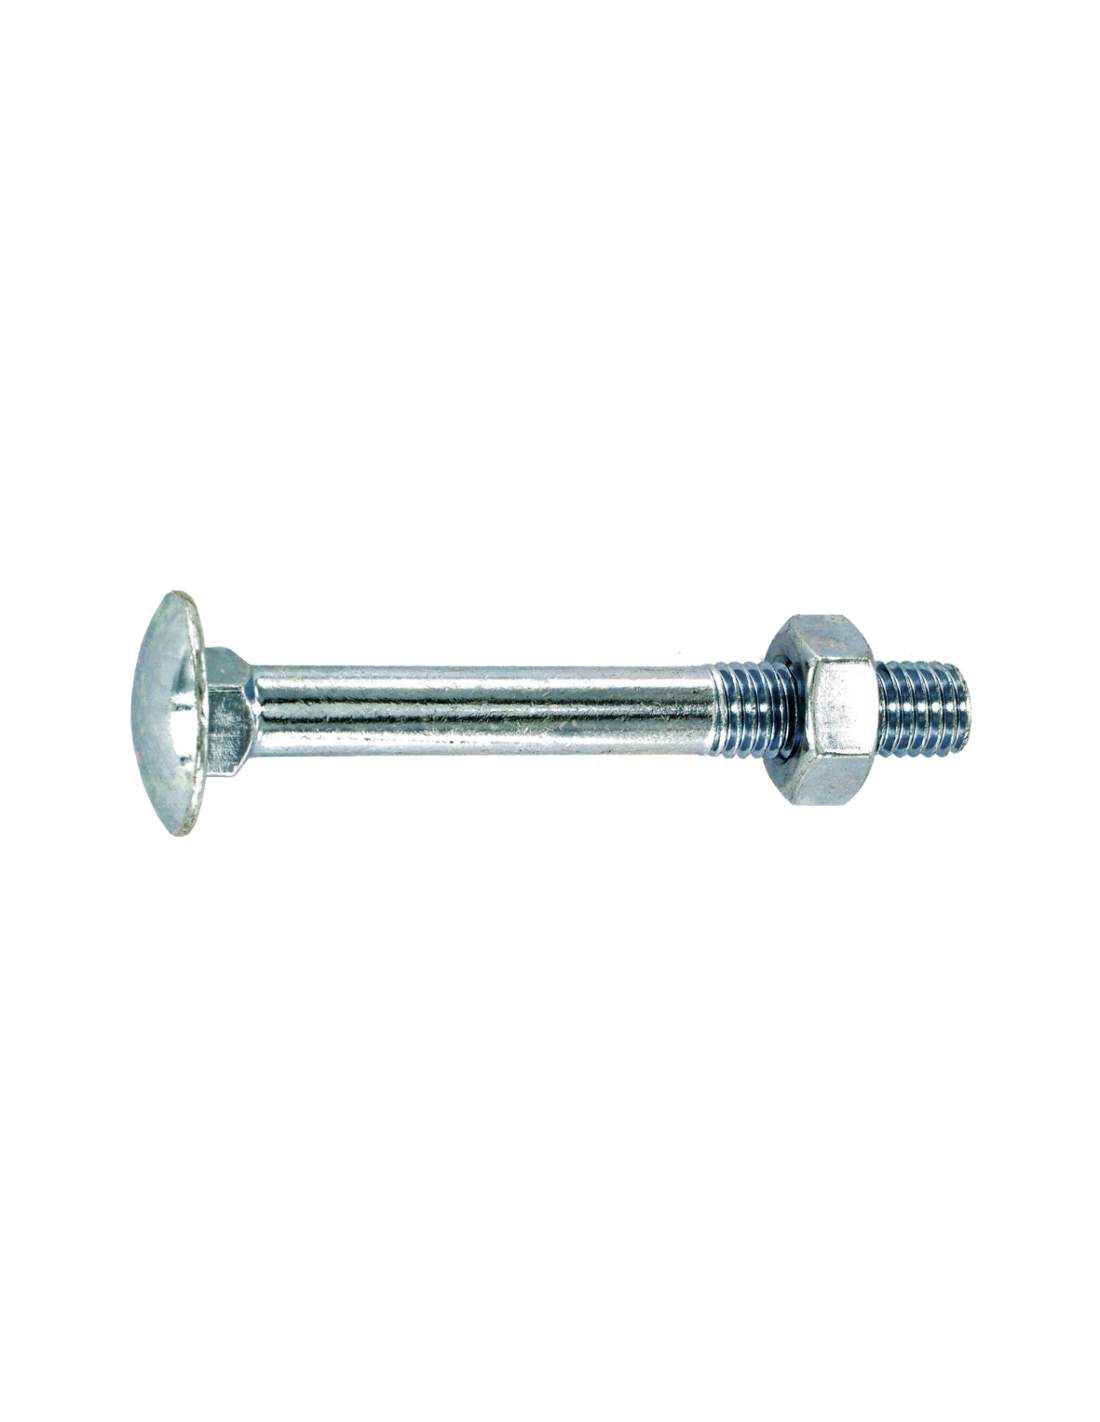 Round-head bolt with square collar in galvanized steel 6x70mm, 5 pcs.